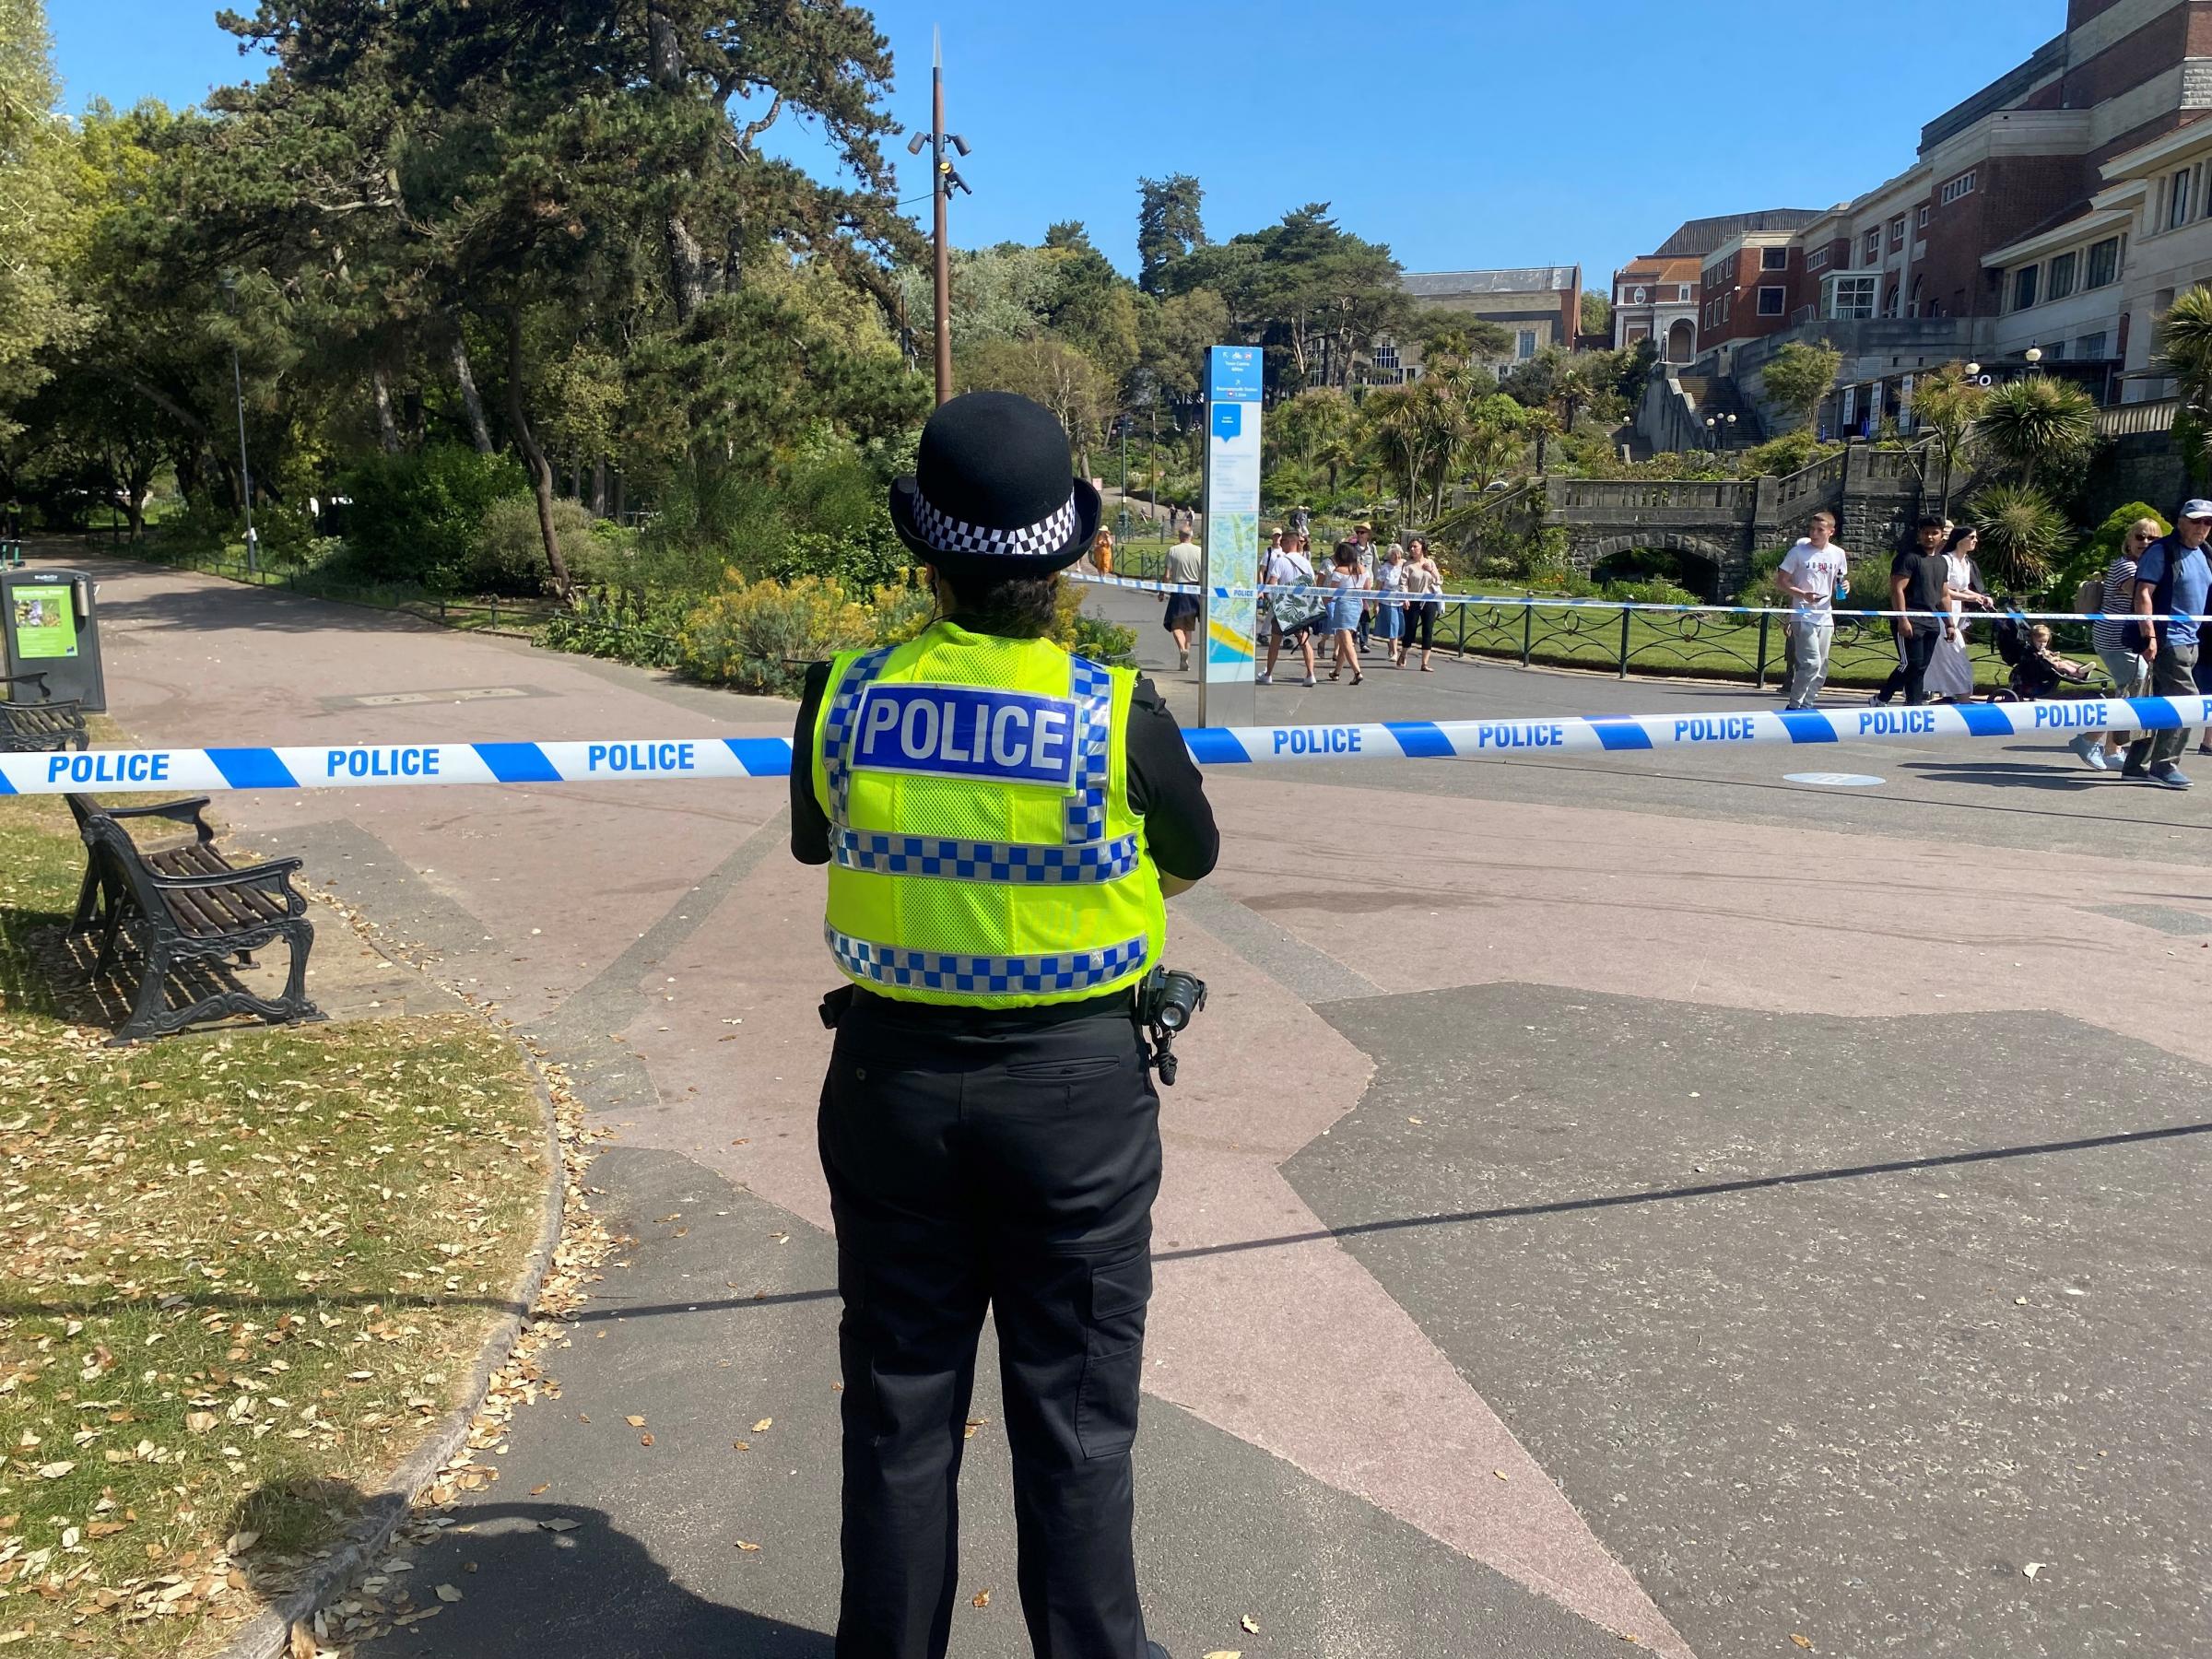 Police in the Lower Gardens, Bournemouth, following an incident late at night on Tuesday, June 8, 2021. Picture: Jane Reader